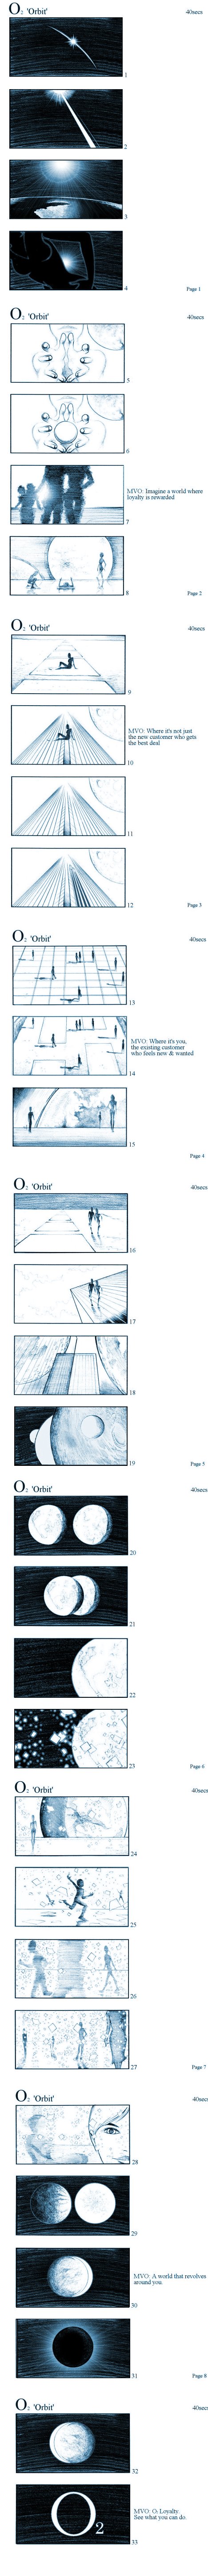 O2 'ORBIT' STORYBOARDS BY ANDY SPARROW